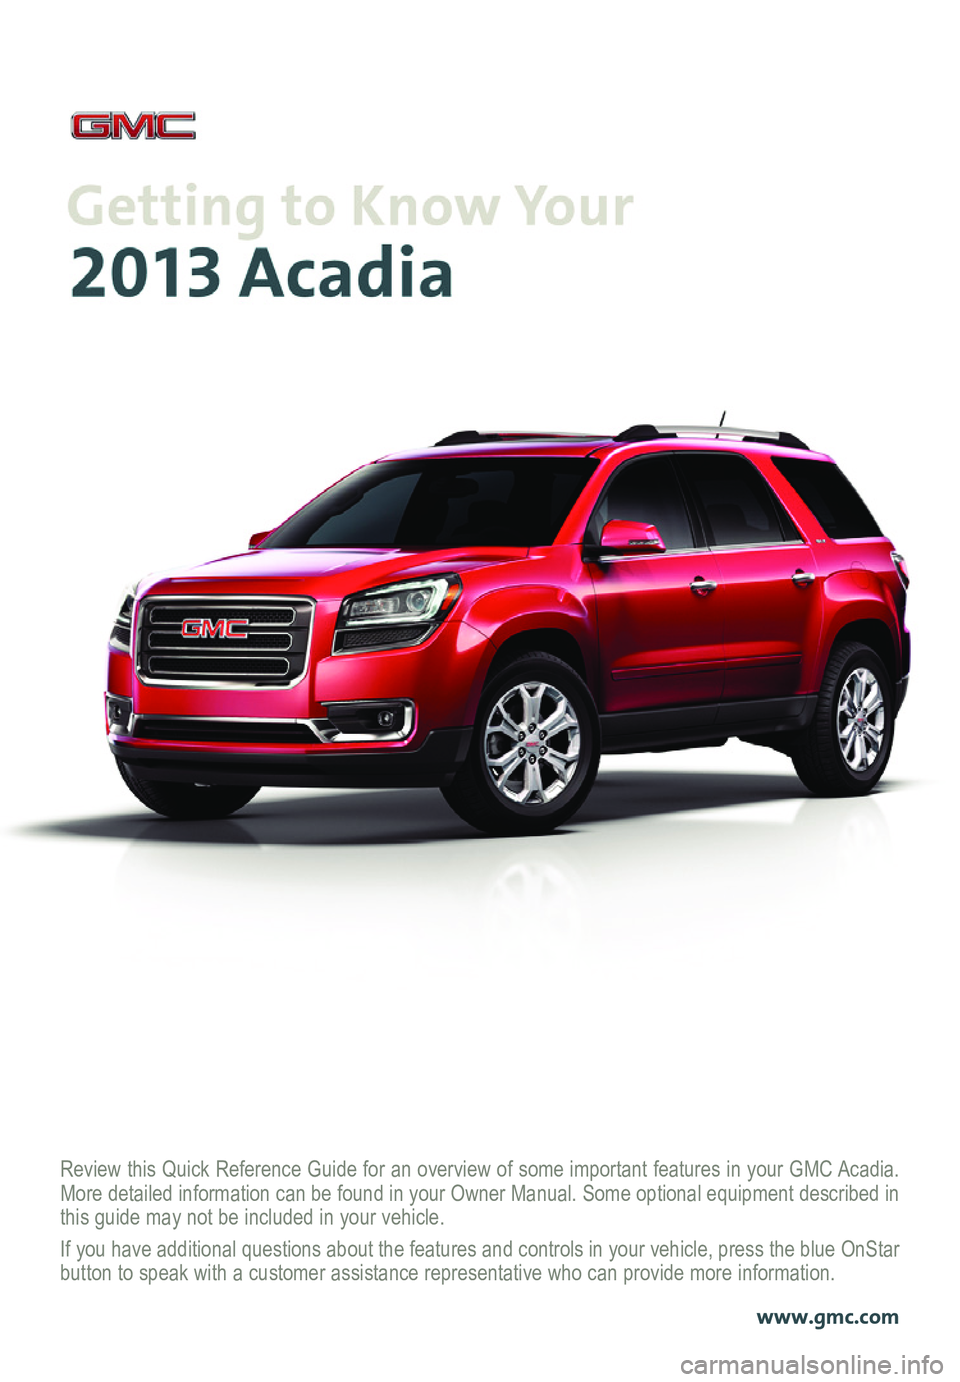 GMC ACADIA 2013  Get To Know Guide Review this Quick Reference Guide for an overview of some important features in your GMC Acadia. More detailed information can be found in your Owner Manual. Some option\
al equipment described in thi